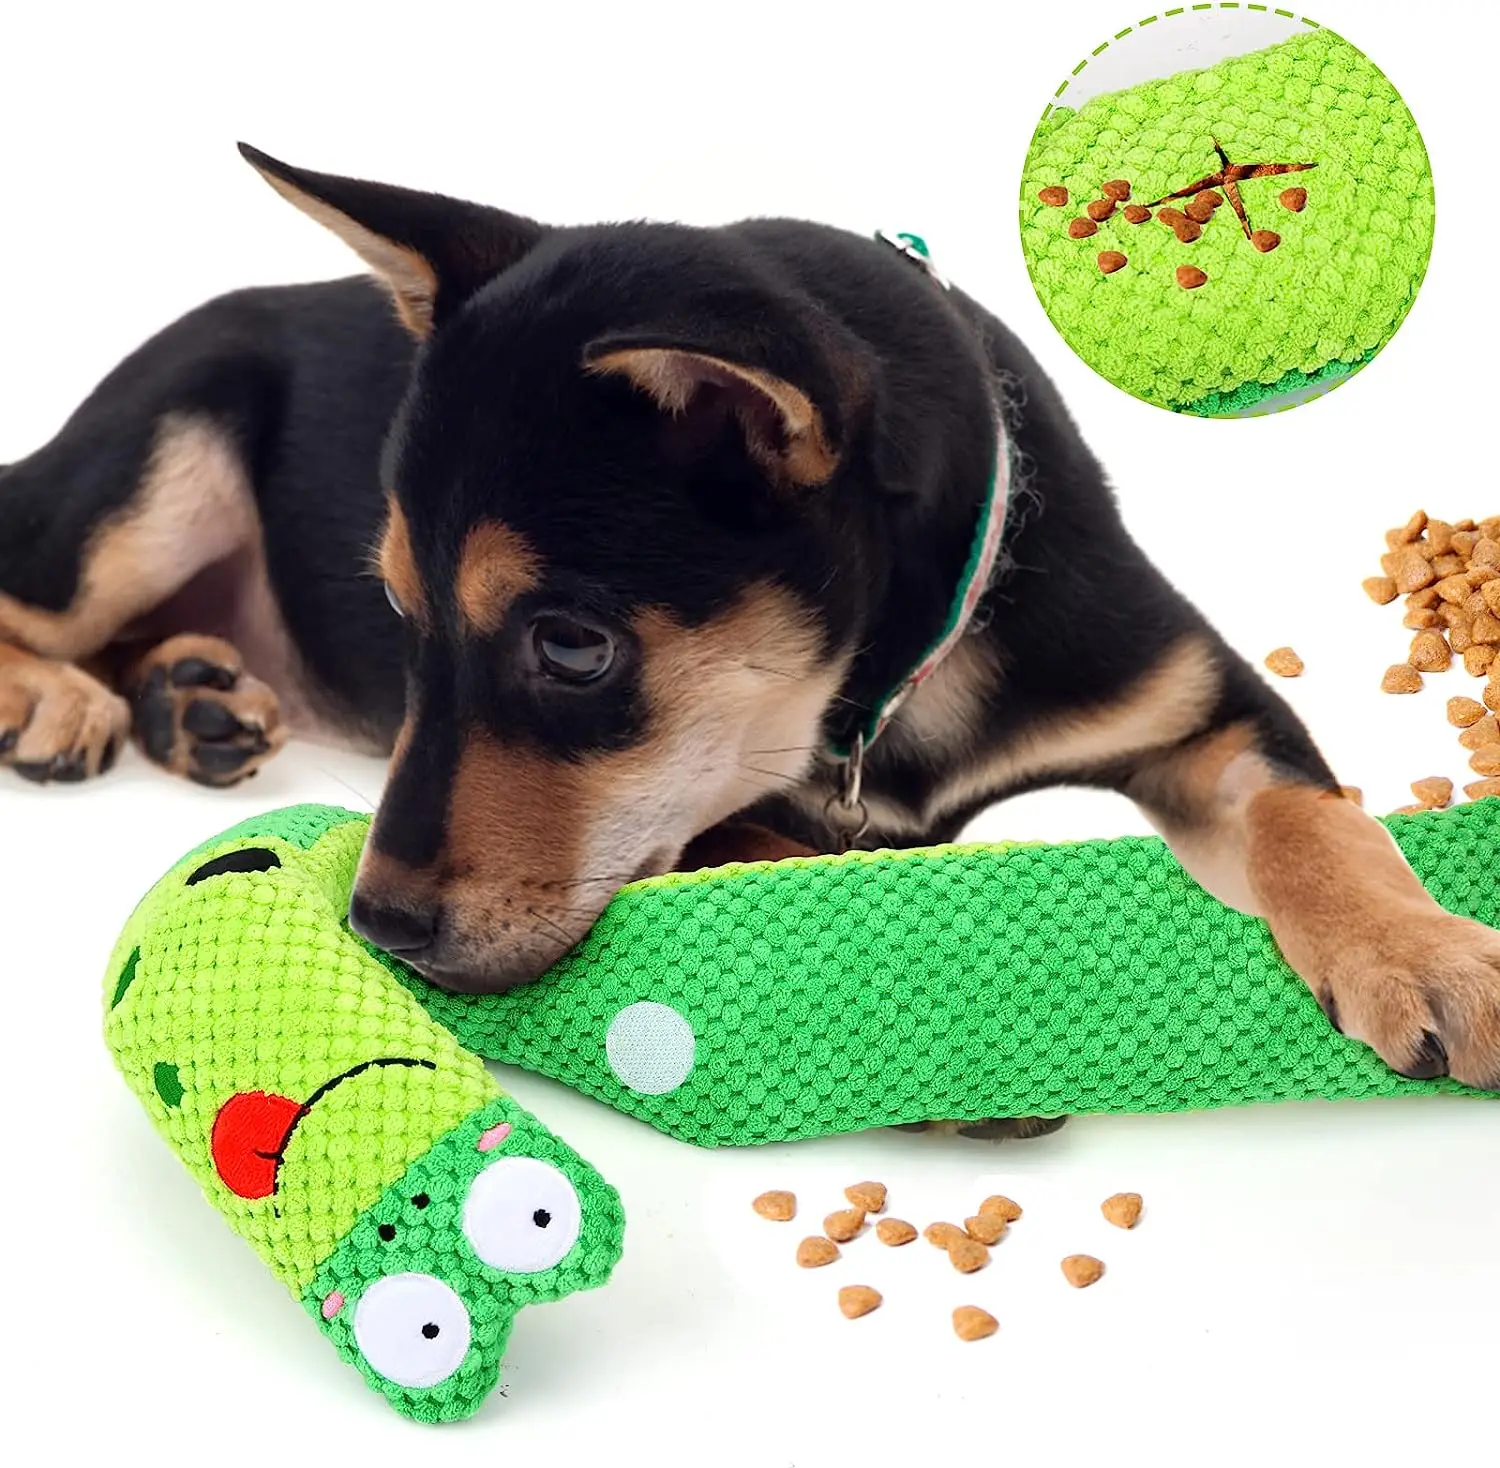 https://ae01.alicdn.com/kf/S377bdac6c06844a2aa011689475f02dew/Pet-Squeak-Puzzle-Puppy-Dog-Toys-for-Small-Large-Dogs-IQ-Training-Dog-Snuffle-Toys-Foraging.jpg